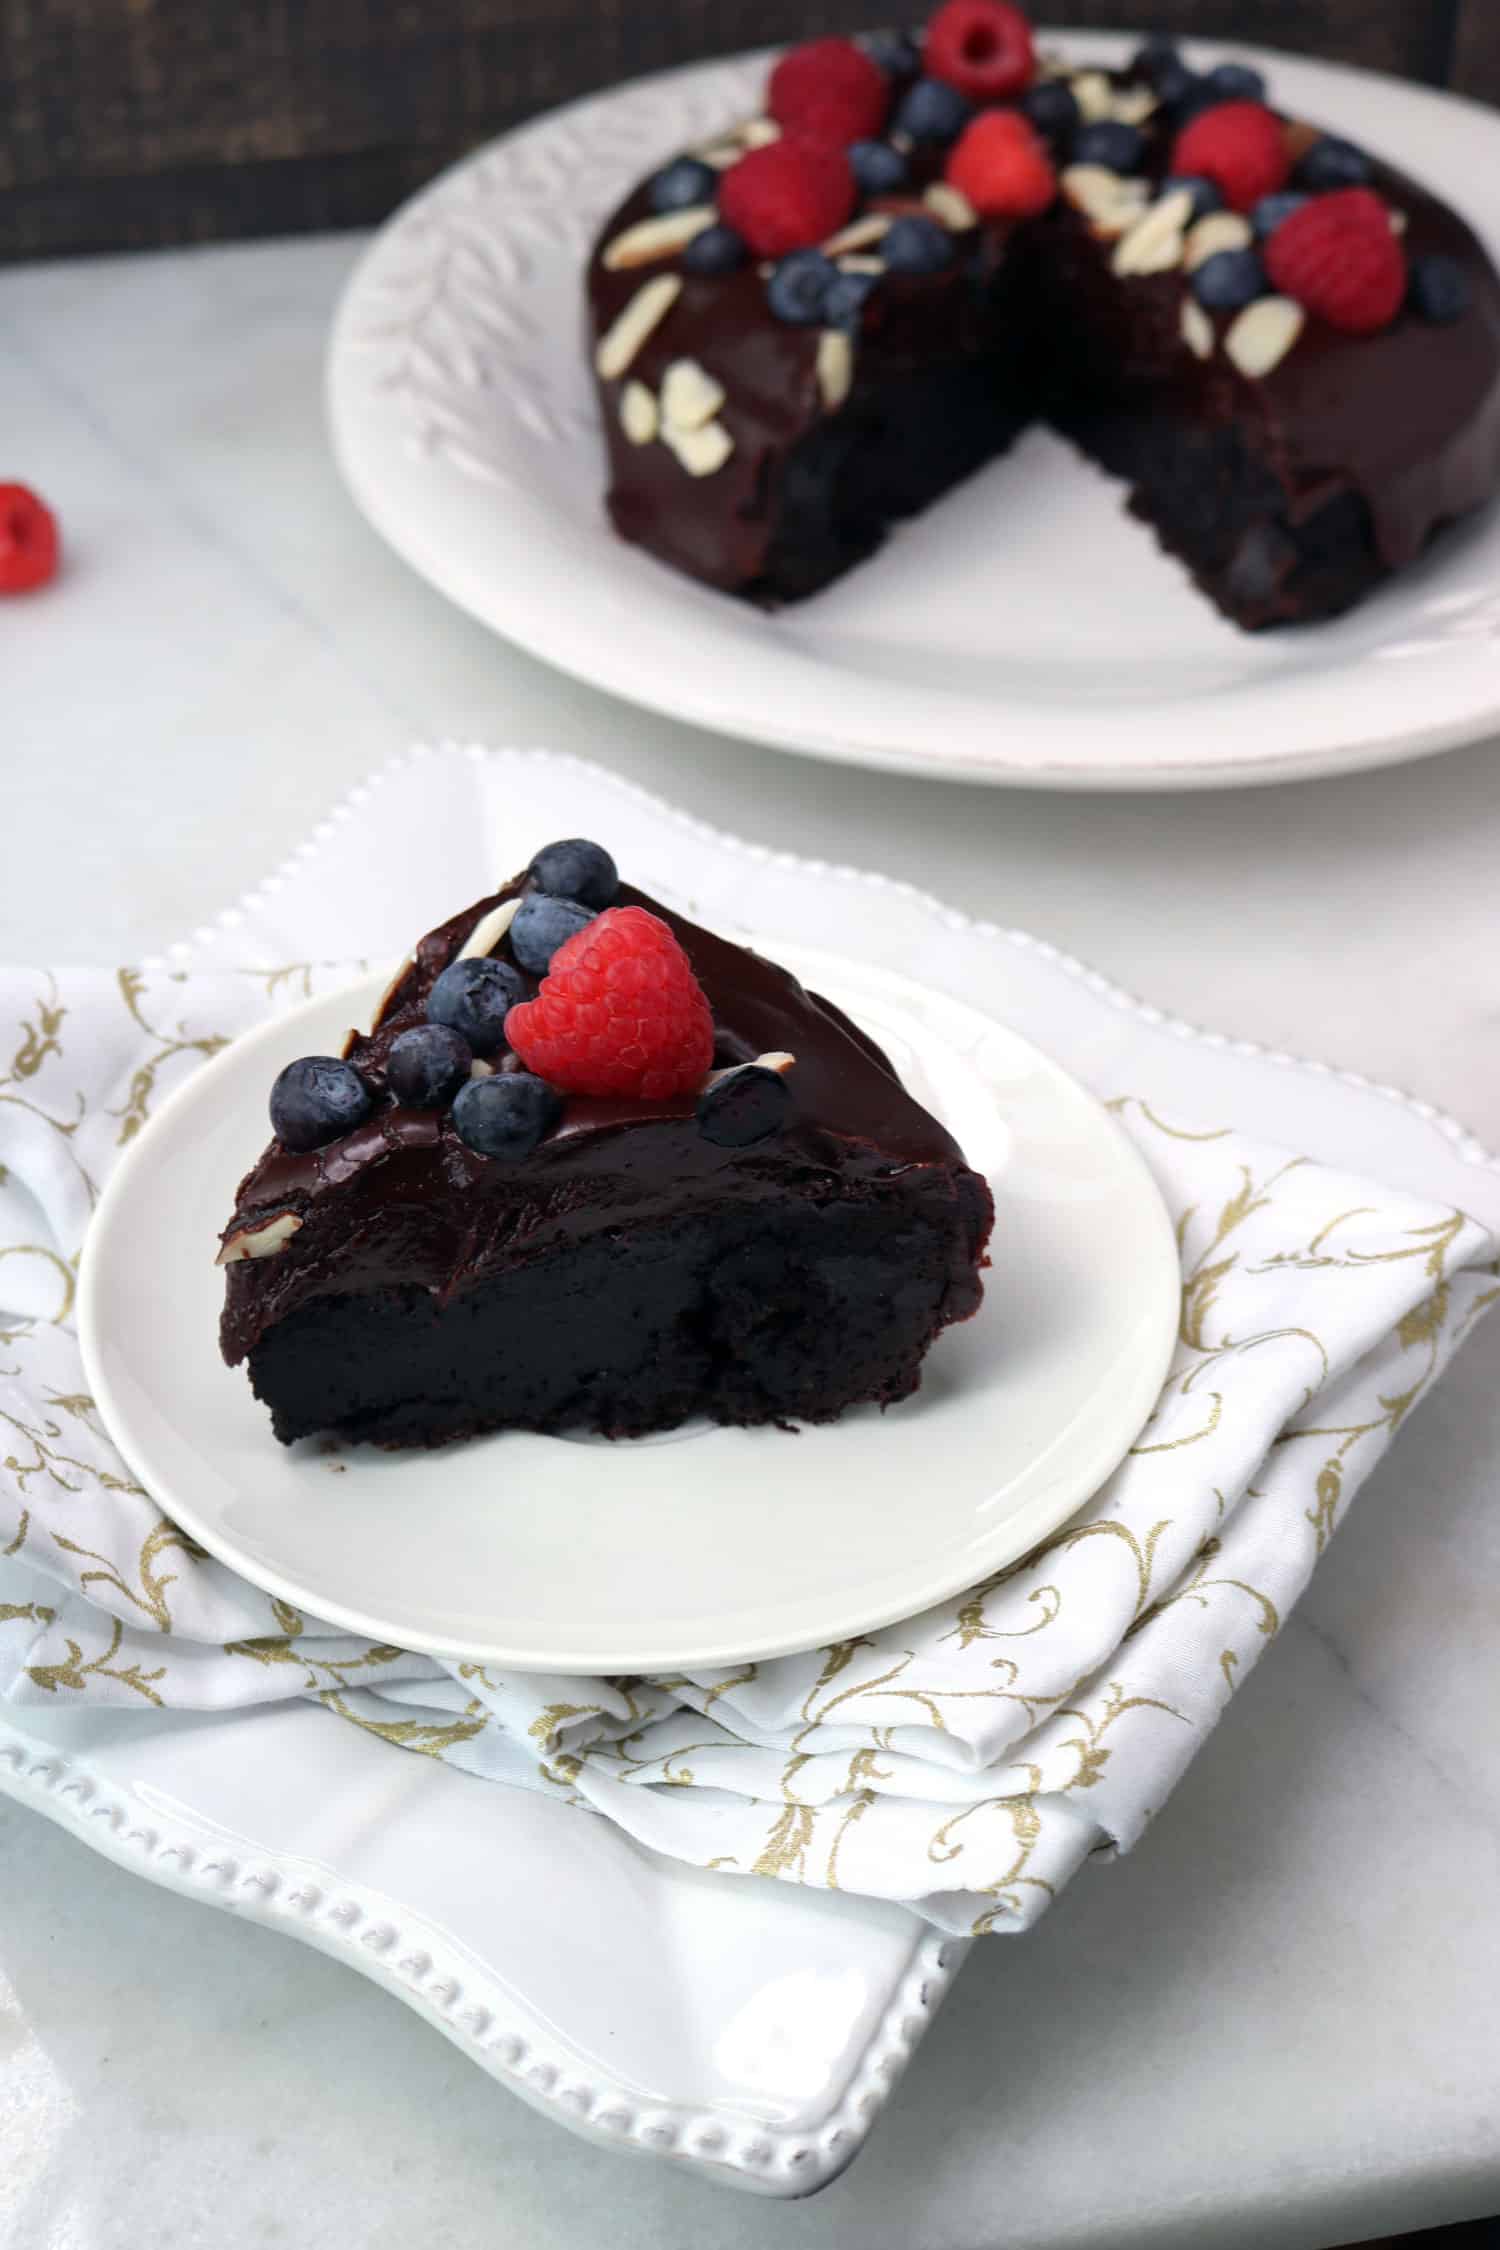 Gluten Free Cake - Flourless Chocolate Cake with Dark Chocolate Ganache topped with raspberries and blueberries sitting on a white plate with a slice cut out sitting on a white plate infront